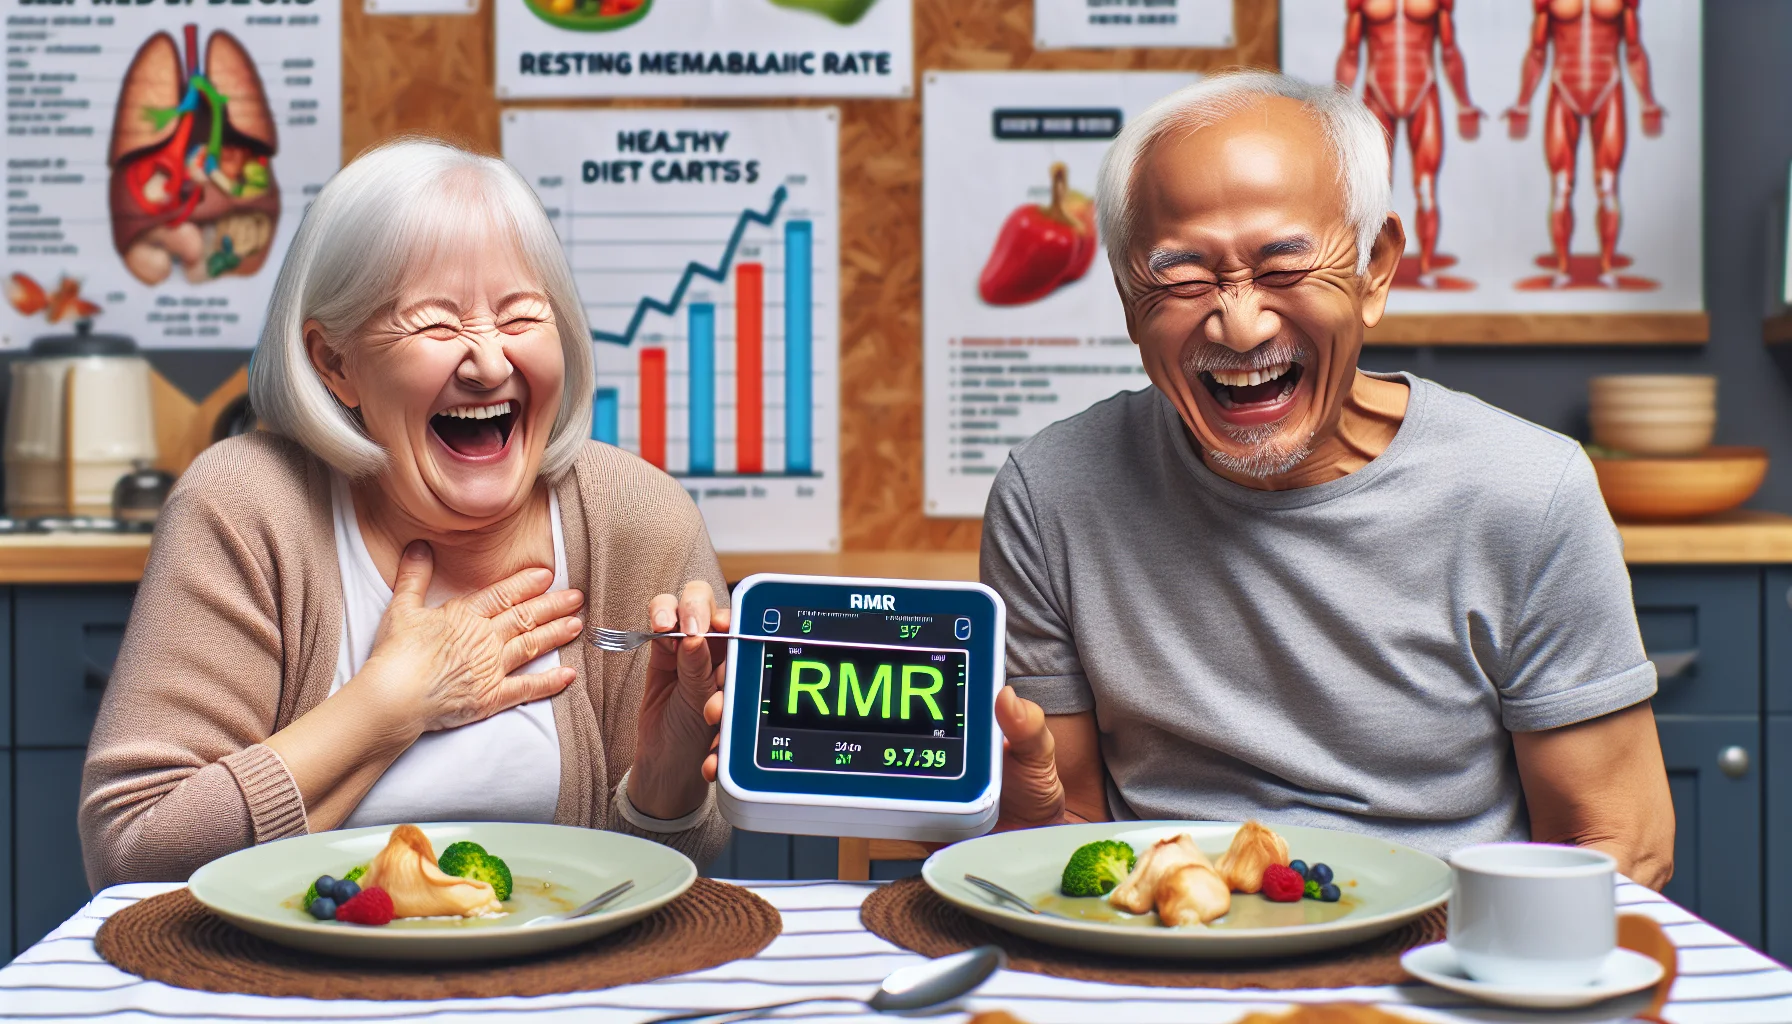 Generate an amusing and lifelike image. Visualize an older Caucasian woman and South Asian man in a senior home, both laughing heartily. They are surrounded by empty plates, suggesting they have just finished a large meal. In the middle of the table is a tiny digital device displaying 'RMR' or Resting Metabolic Rate, outrageously high, leading to their amusement. The room is filled with healthy diet charts for seniors and funny posters about food and aging.